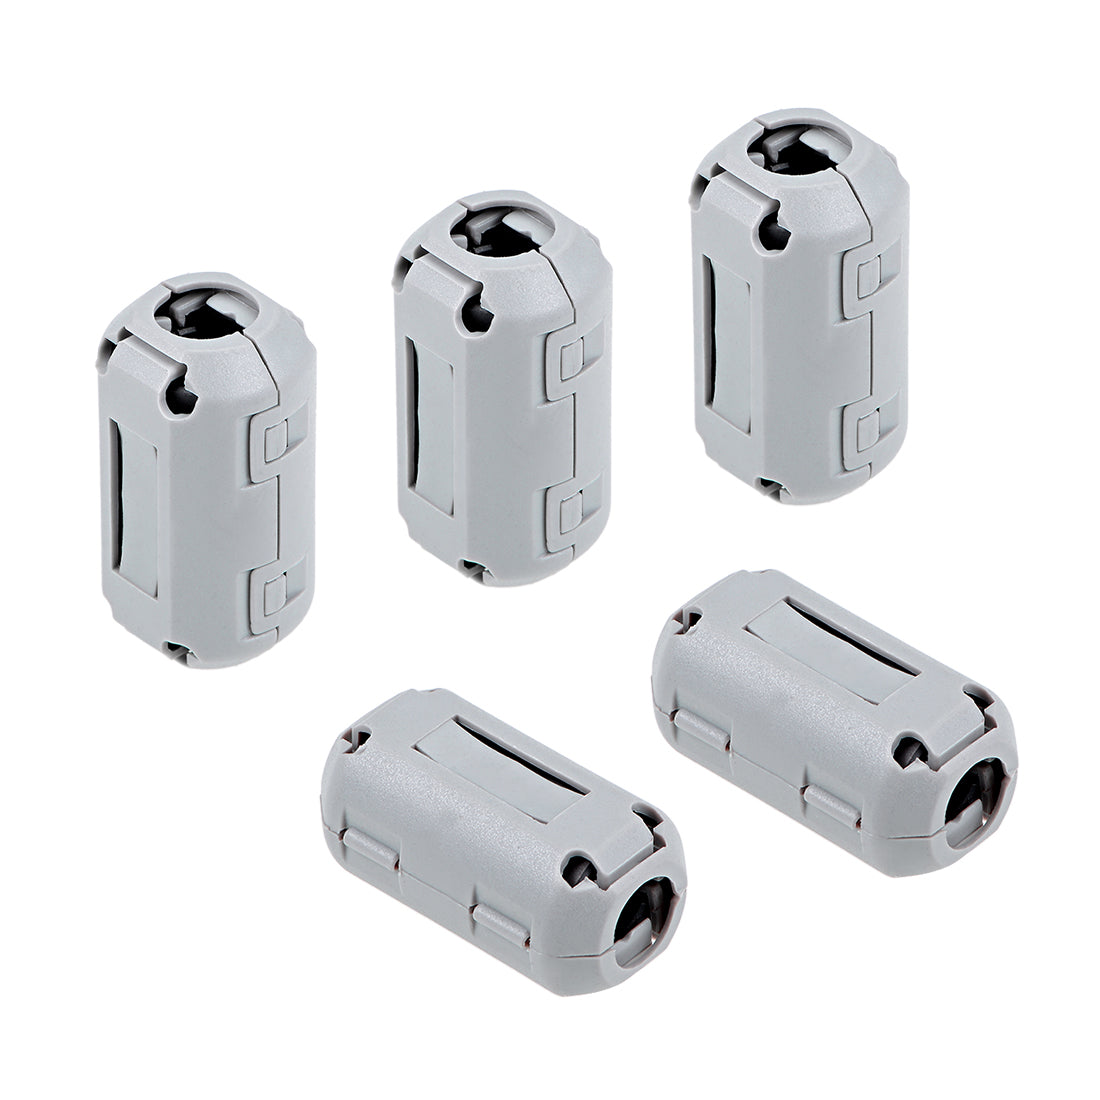 uxcell Uxcell 9mm Ferrite Cores Ring Clip-On RFI EMI Noise Suppression Cable Clip, Grey 5pcs